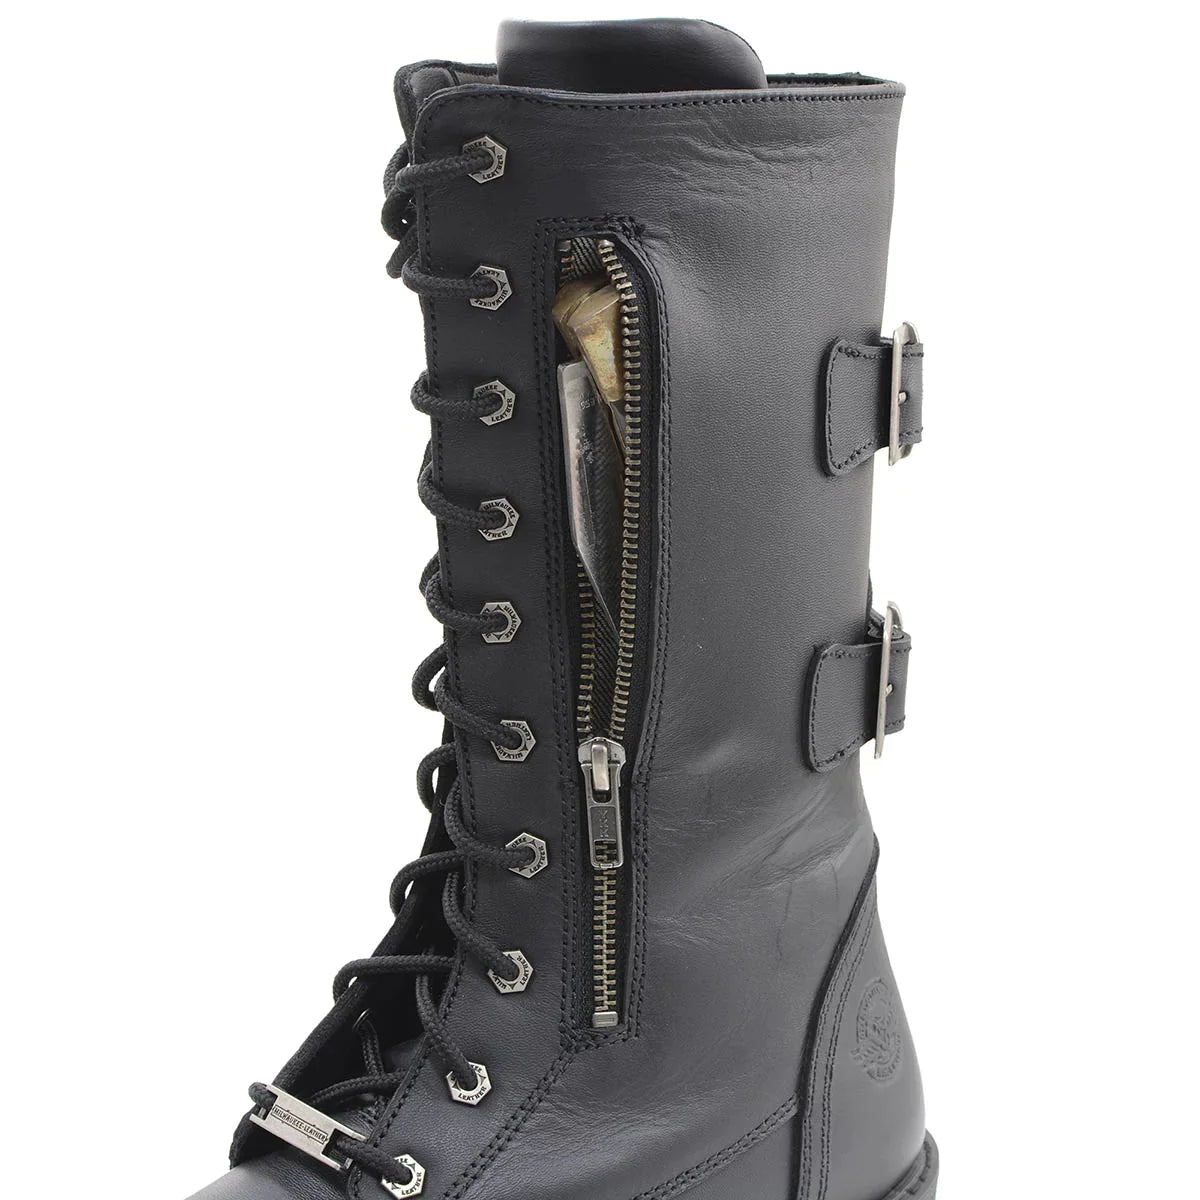 Men’s Black Tall ‘Tactical’ Lace-Up Boots with Buckles Storage Pockets